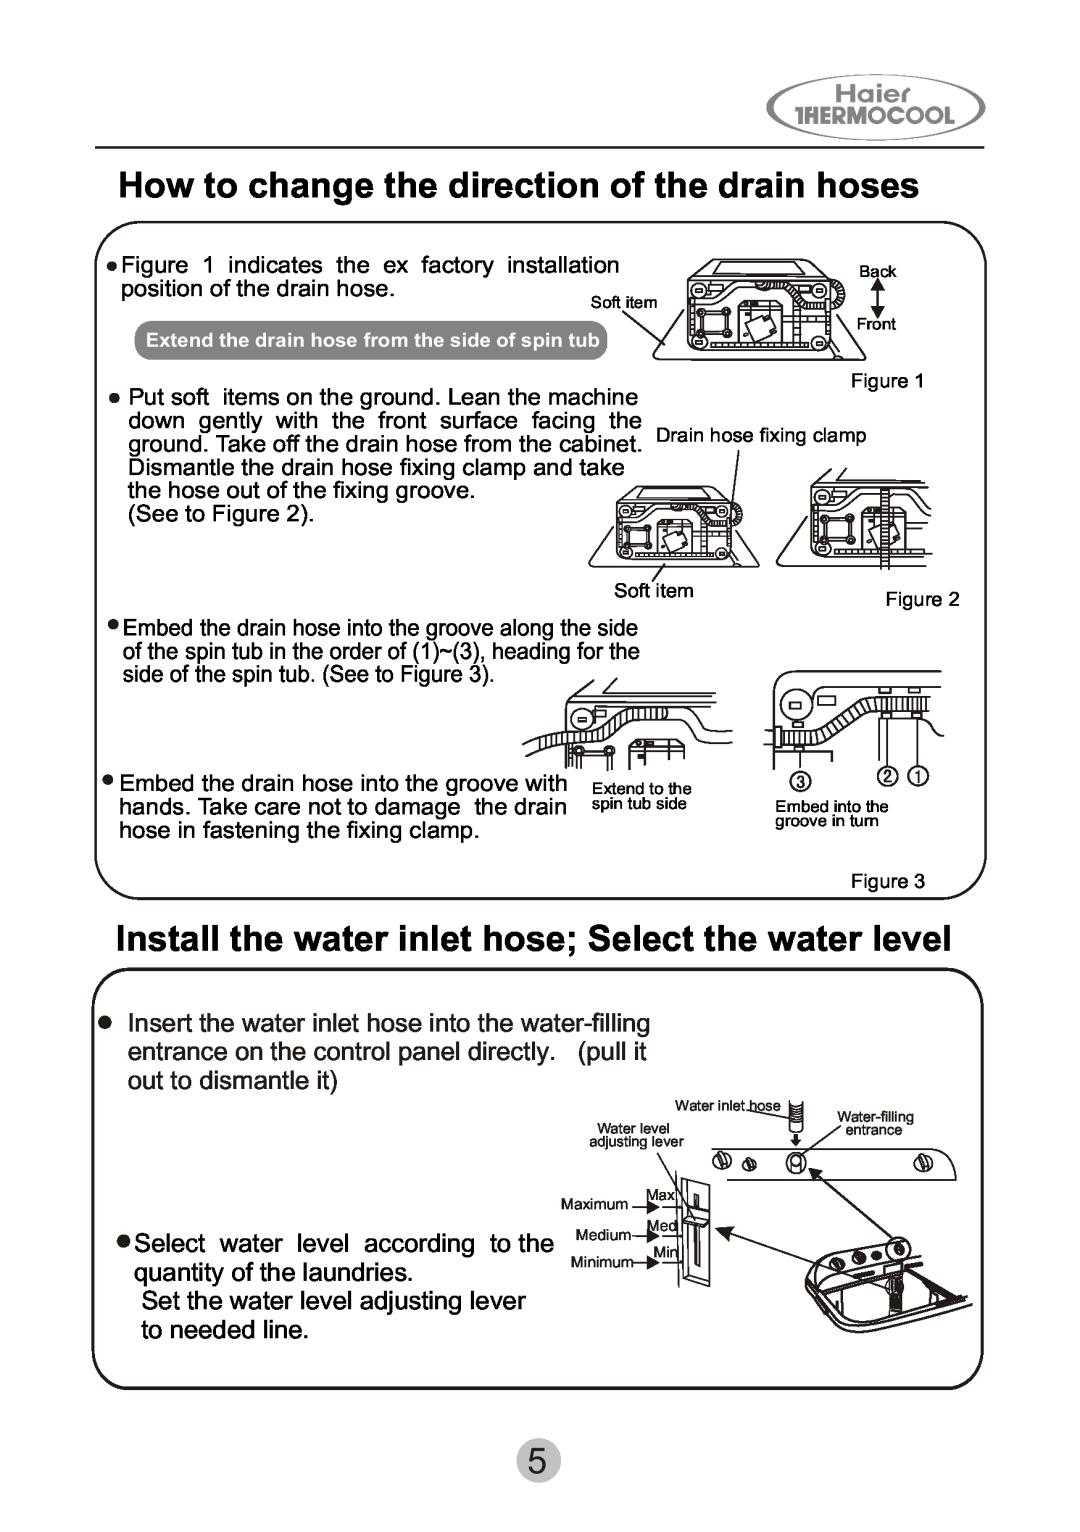 Haier HWM130-0523S How to change the direction of the drain hoses, Install the water inlet hose Select the water level 